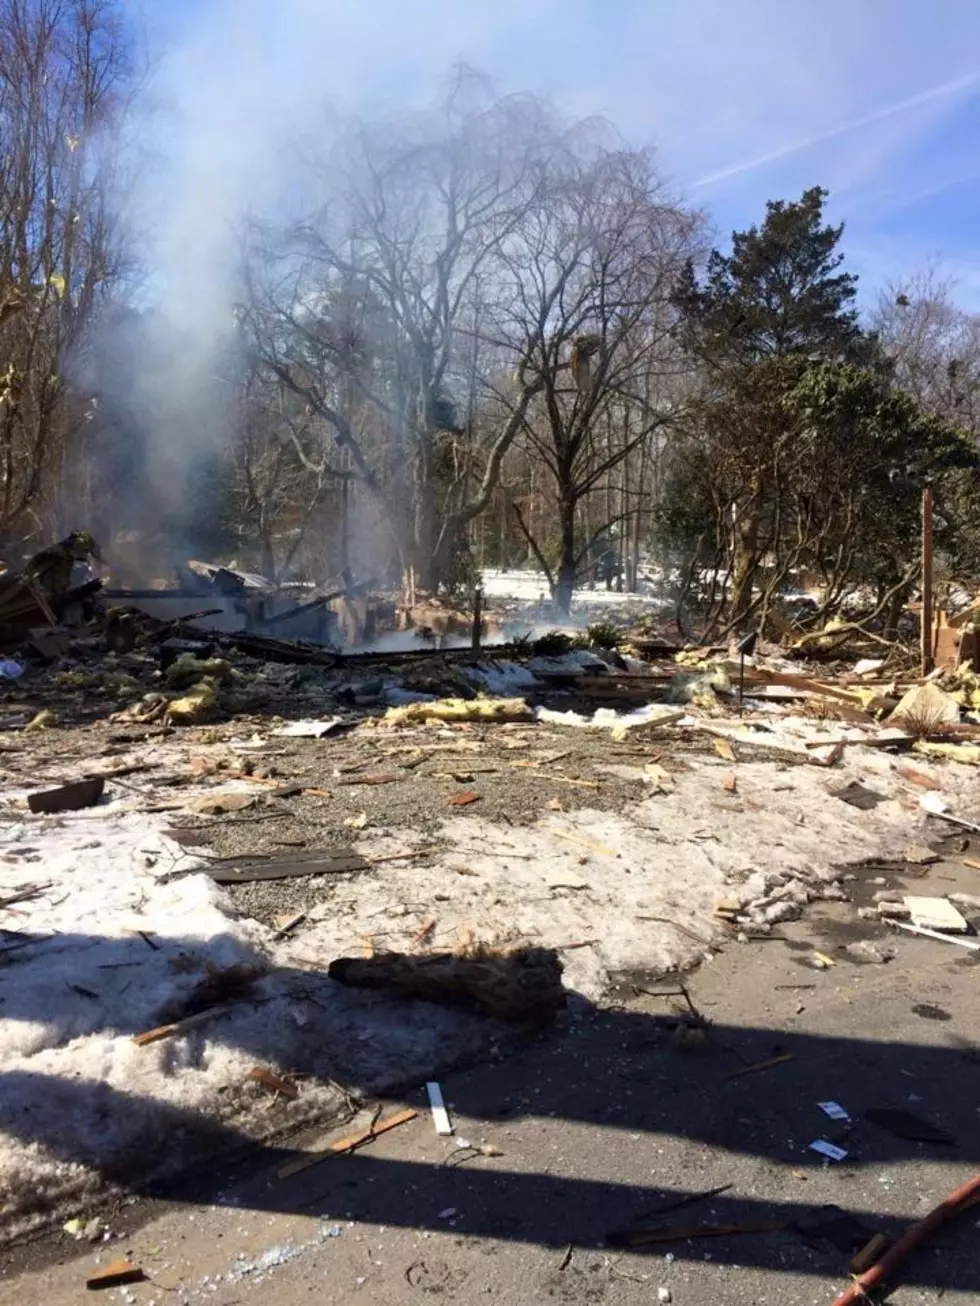 See Video Of Today’s Stafford Gas Explosion